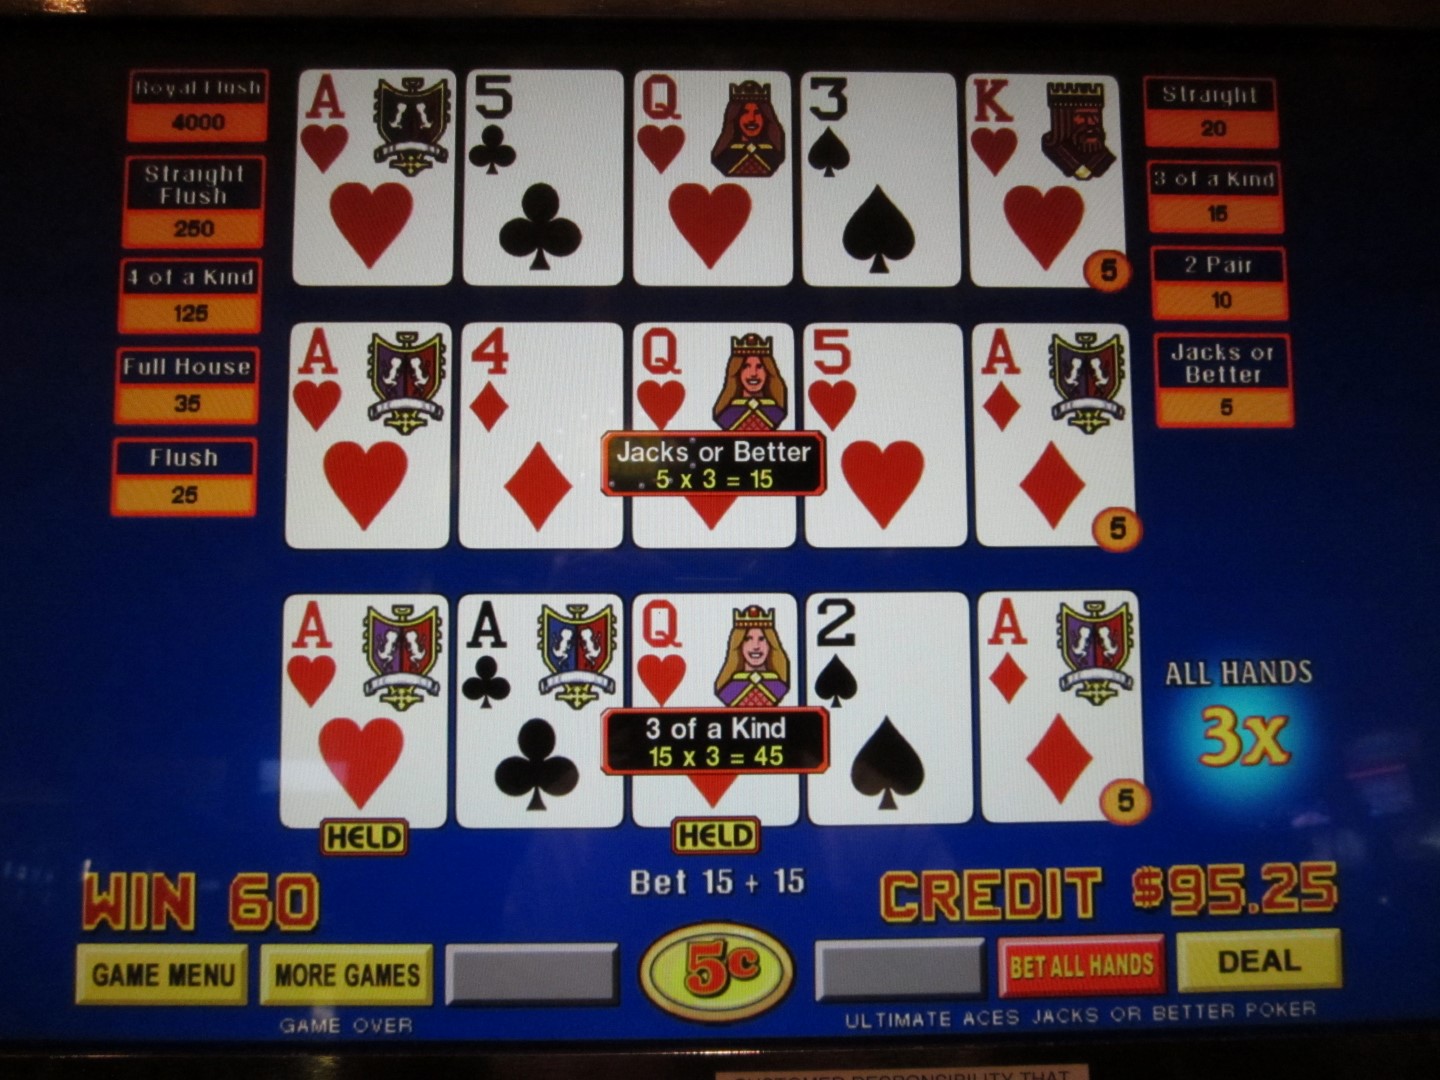 Ace the Game: Winning at Video Poker